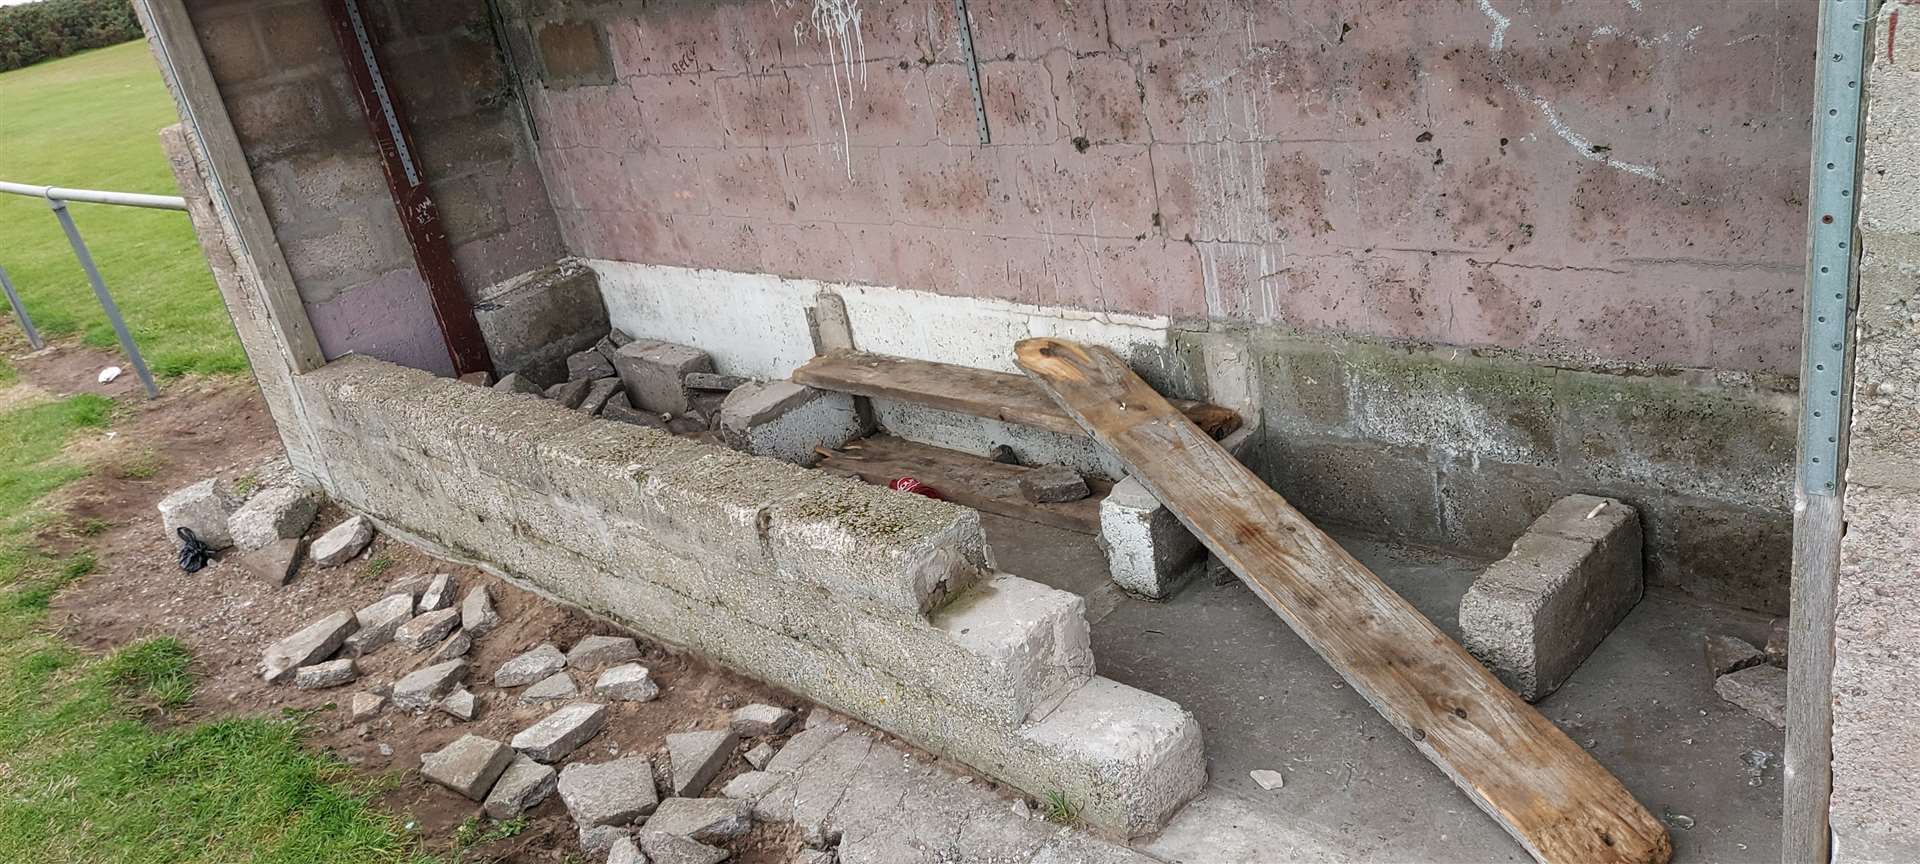 The dugouts lie trashed after being targeted by vandals. Pictures: Buckie Rovers